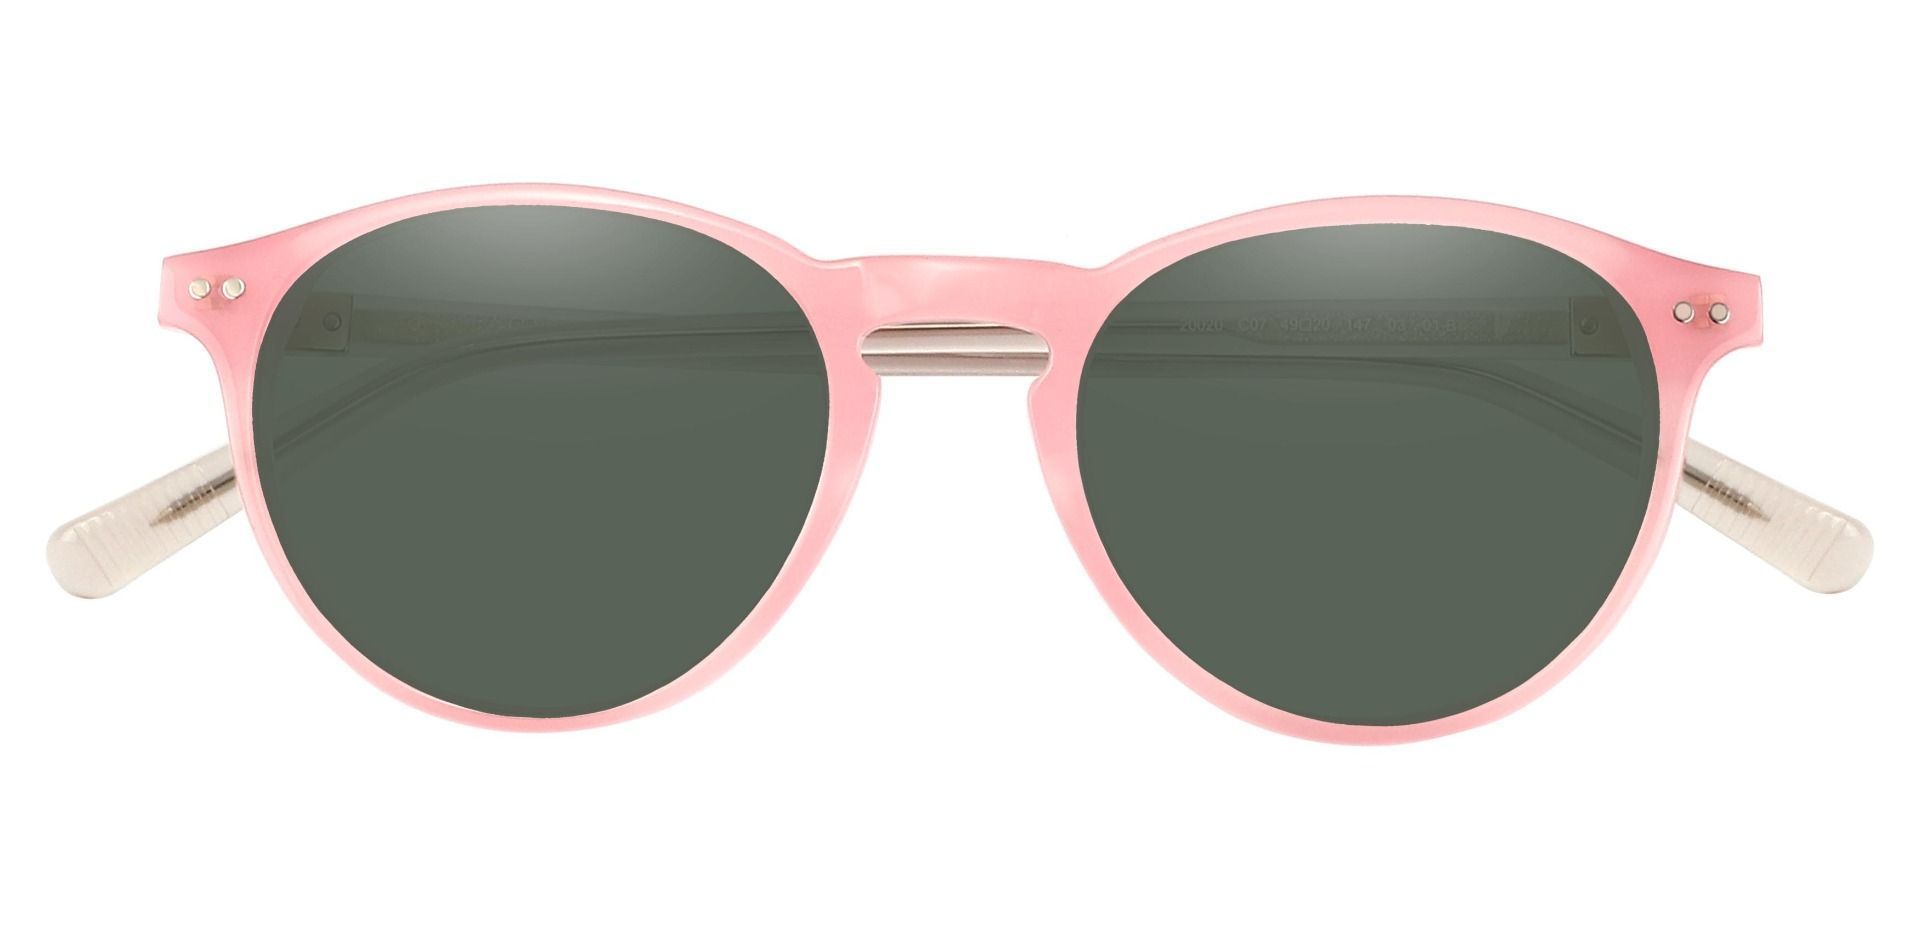 Monarch Oval Lined Bifocal Sunglasses - Pink Frame With Green Lenses